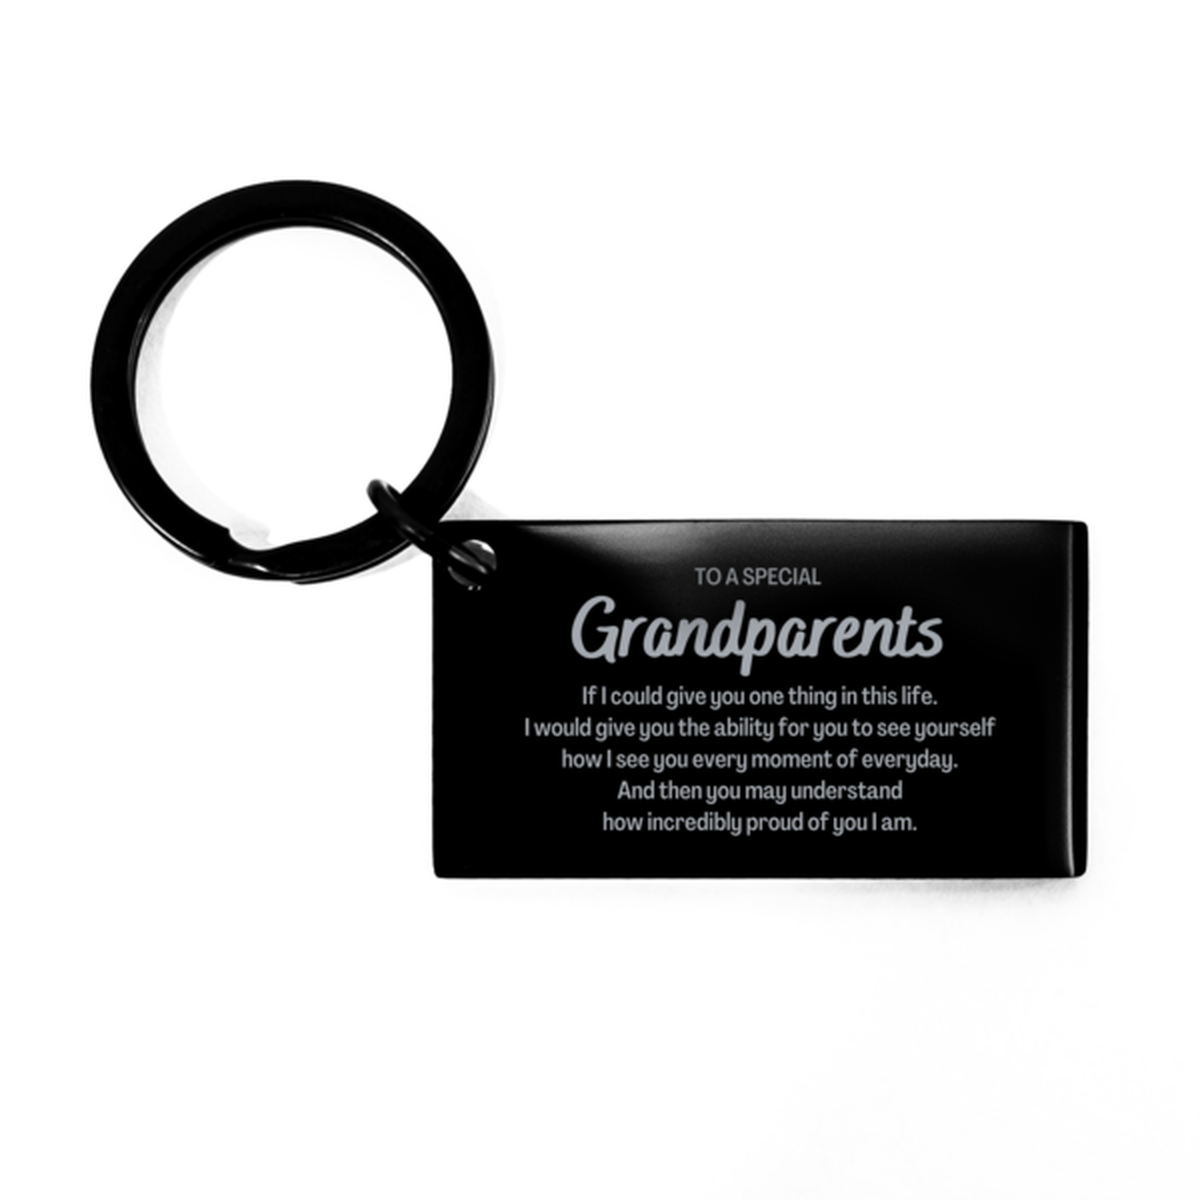 To My Grandparents Keychain, Gifts For Grandparents Engraved, Inspirational Gifts for Christmas Birthday, Epic Gifts for Grandparents To A Special Grandparents how incredibly proud of you I am